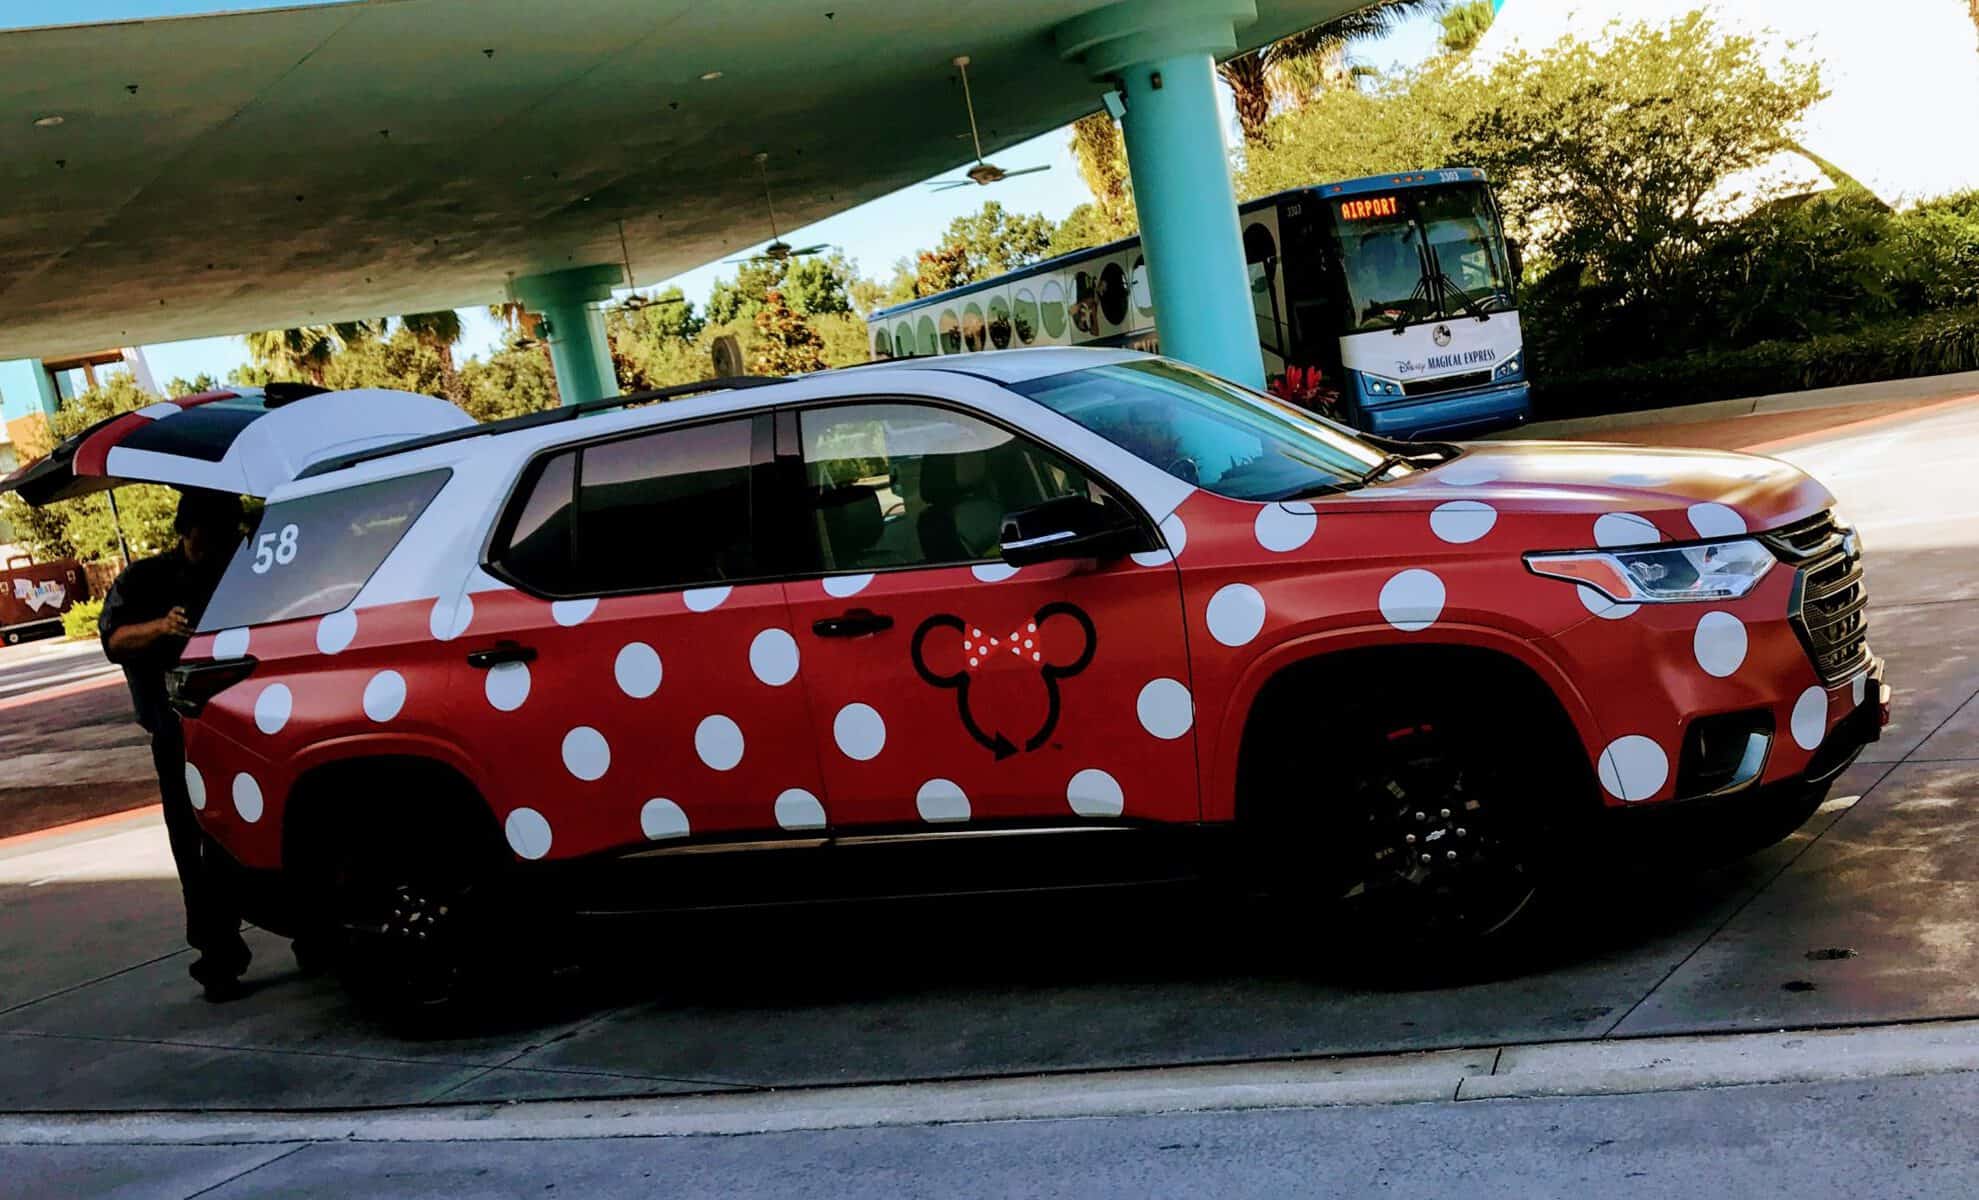 Minnie Vans now available at all resorts! Here’s how they work.